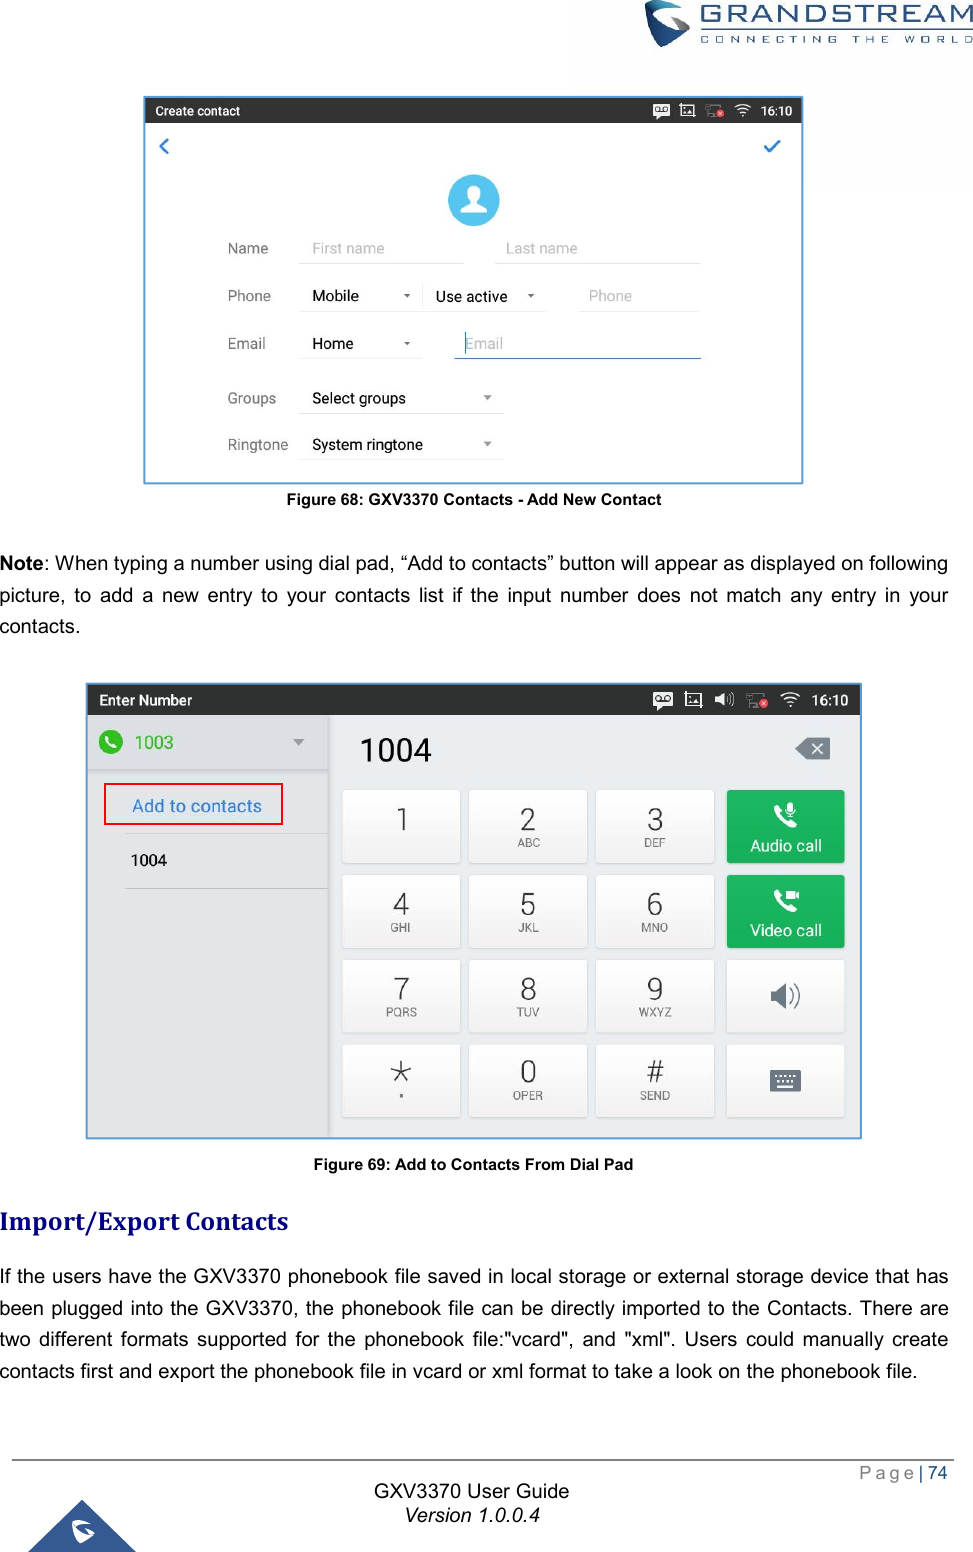  Page| 74  GXV3370 User Guide Version 1.0.0.4  Figure 68: GXV3370 Contacts - Add New Contact  Note: When typing a number using dial pad, “Add to contacts” button will appear as displayed on following picture, to add a new entry to your contacts list if the input number does not match any entry in your contacts.   Figure 69: Add to Contacts From Dial Pad Import/Export Contacts If the users have the GXV3370 phonebook file saved in local storage or external storage device that has been plugged into the GXV3370, the phonebook file can be directly imported to the Contacts. There are two different formats supported for the phonebook file:&quot;vcard&quot;, and &quot;xml&quot;. Users could manually create contacts first and export the phonebook file in vcard or xml format to take a look on the phonebook file. 